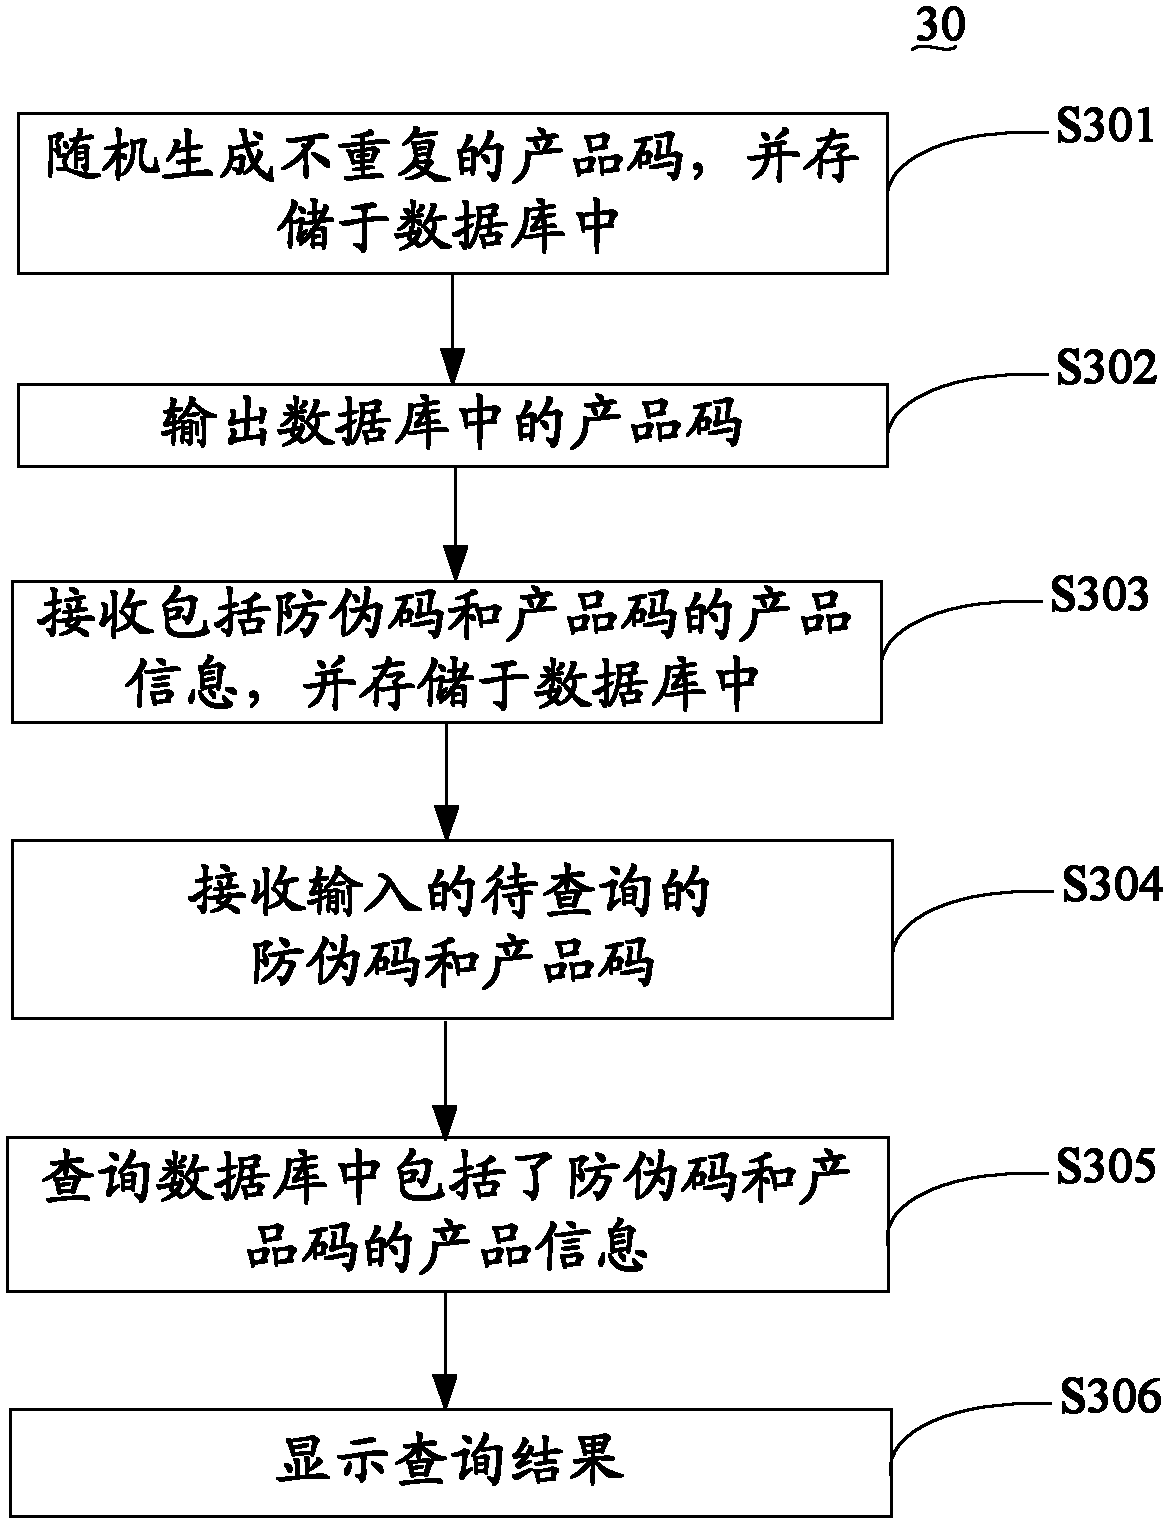 Data statistical system and method